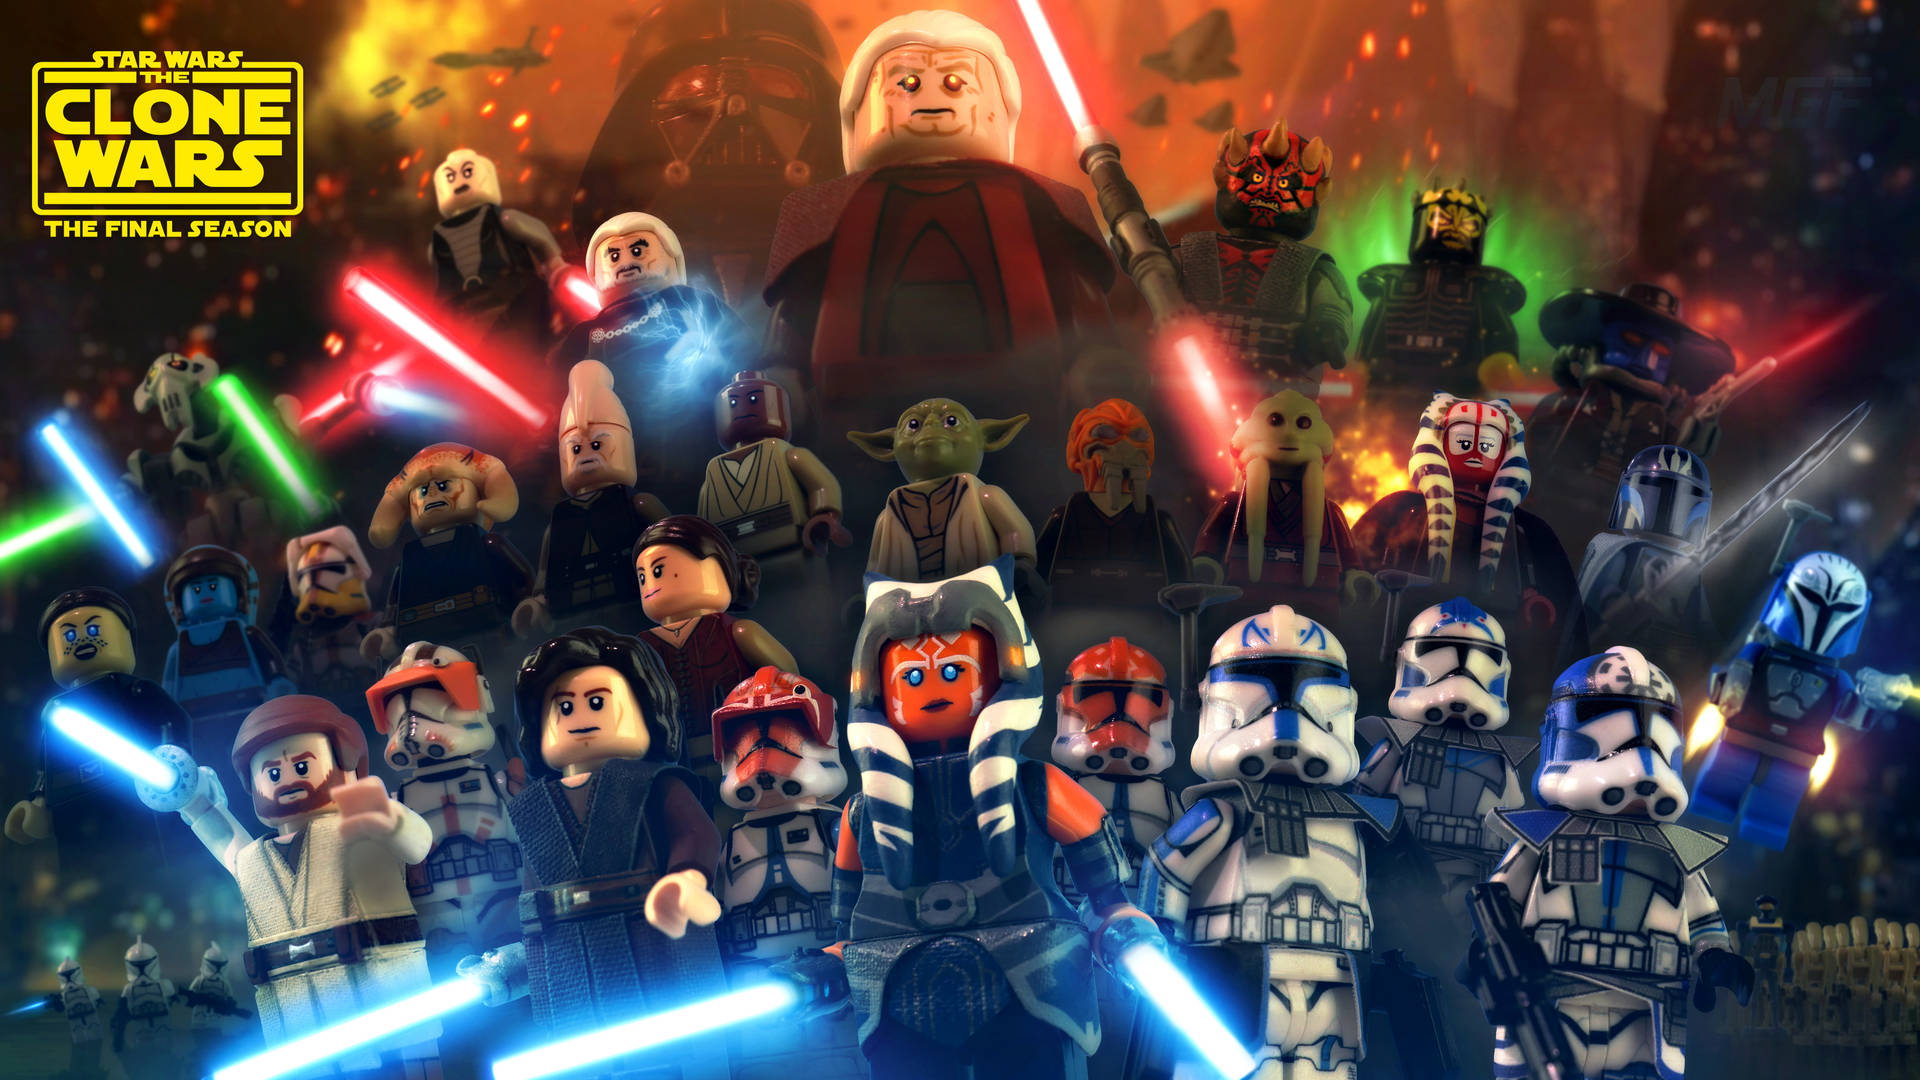 "The Force Awakens with Stars of Lego Star Wars!" Wallpaper